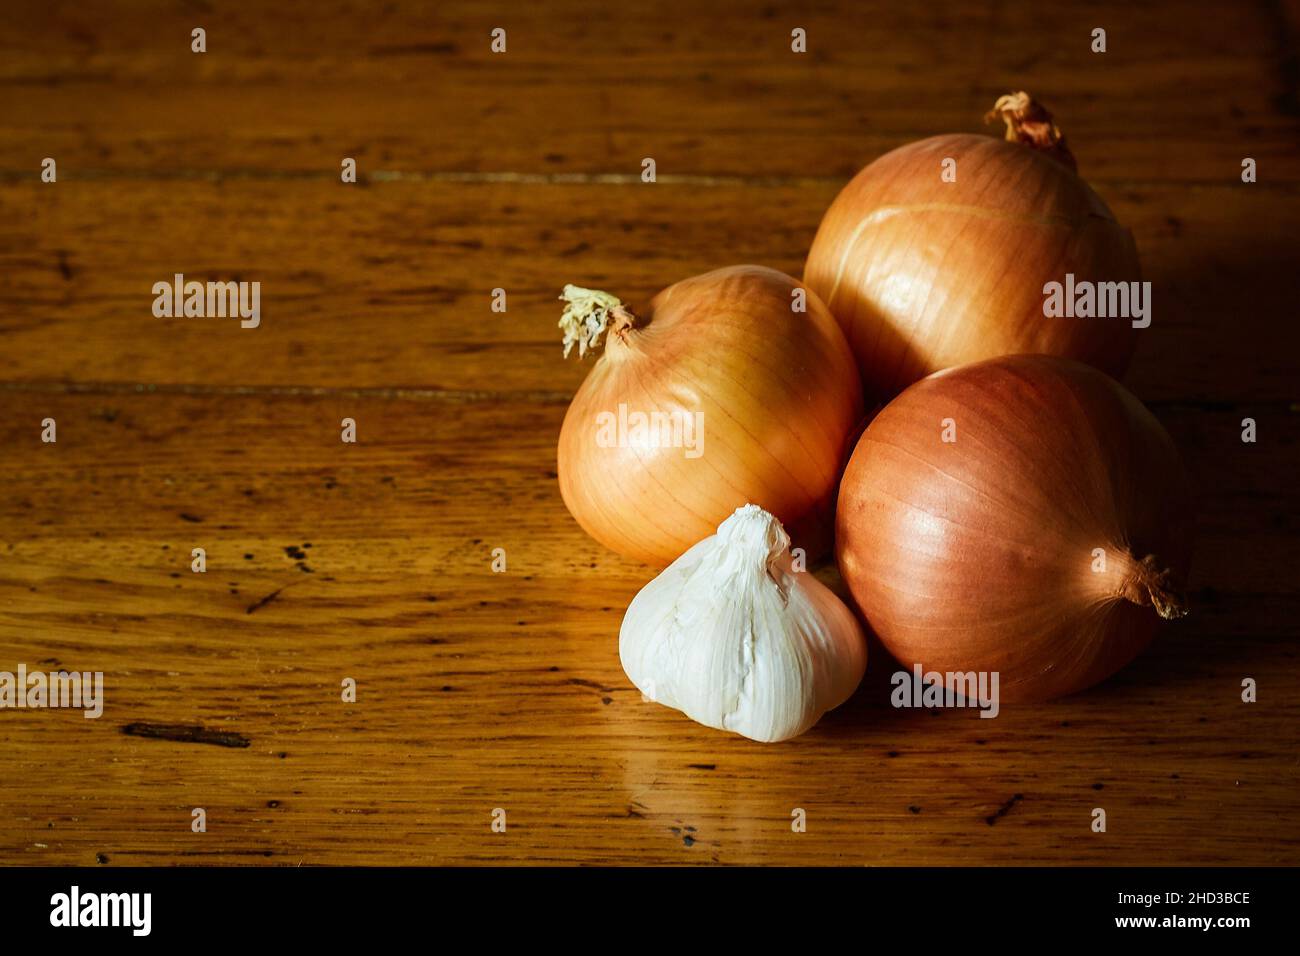 Three Onions and One Garlic Bulb on Wooden Table Stock Photo